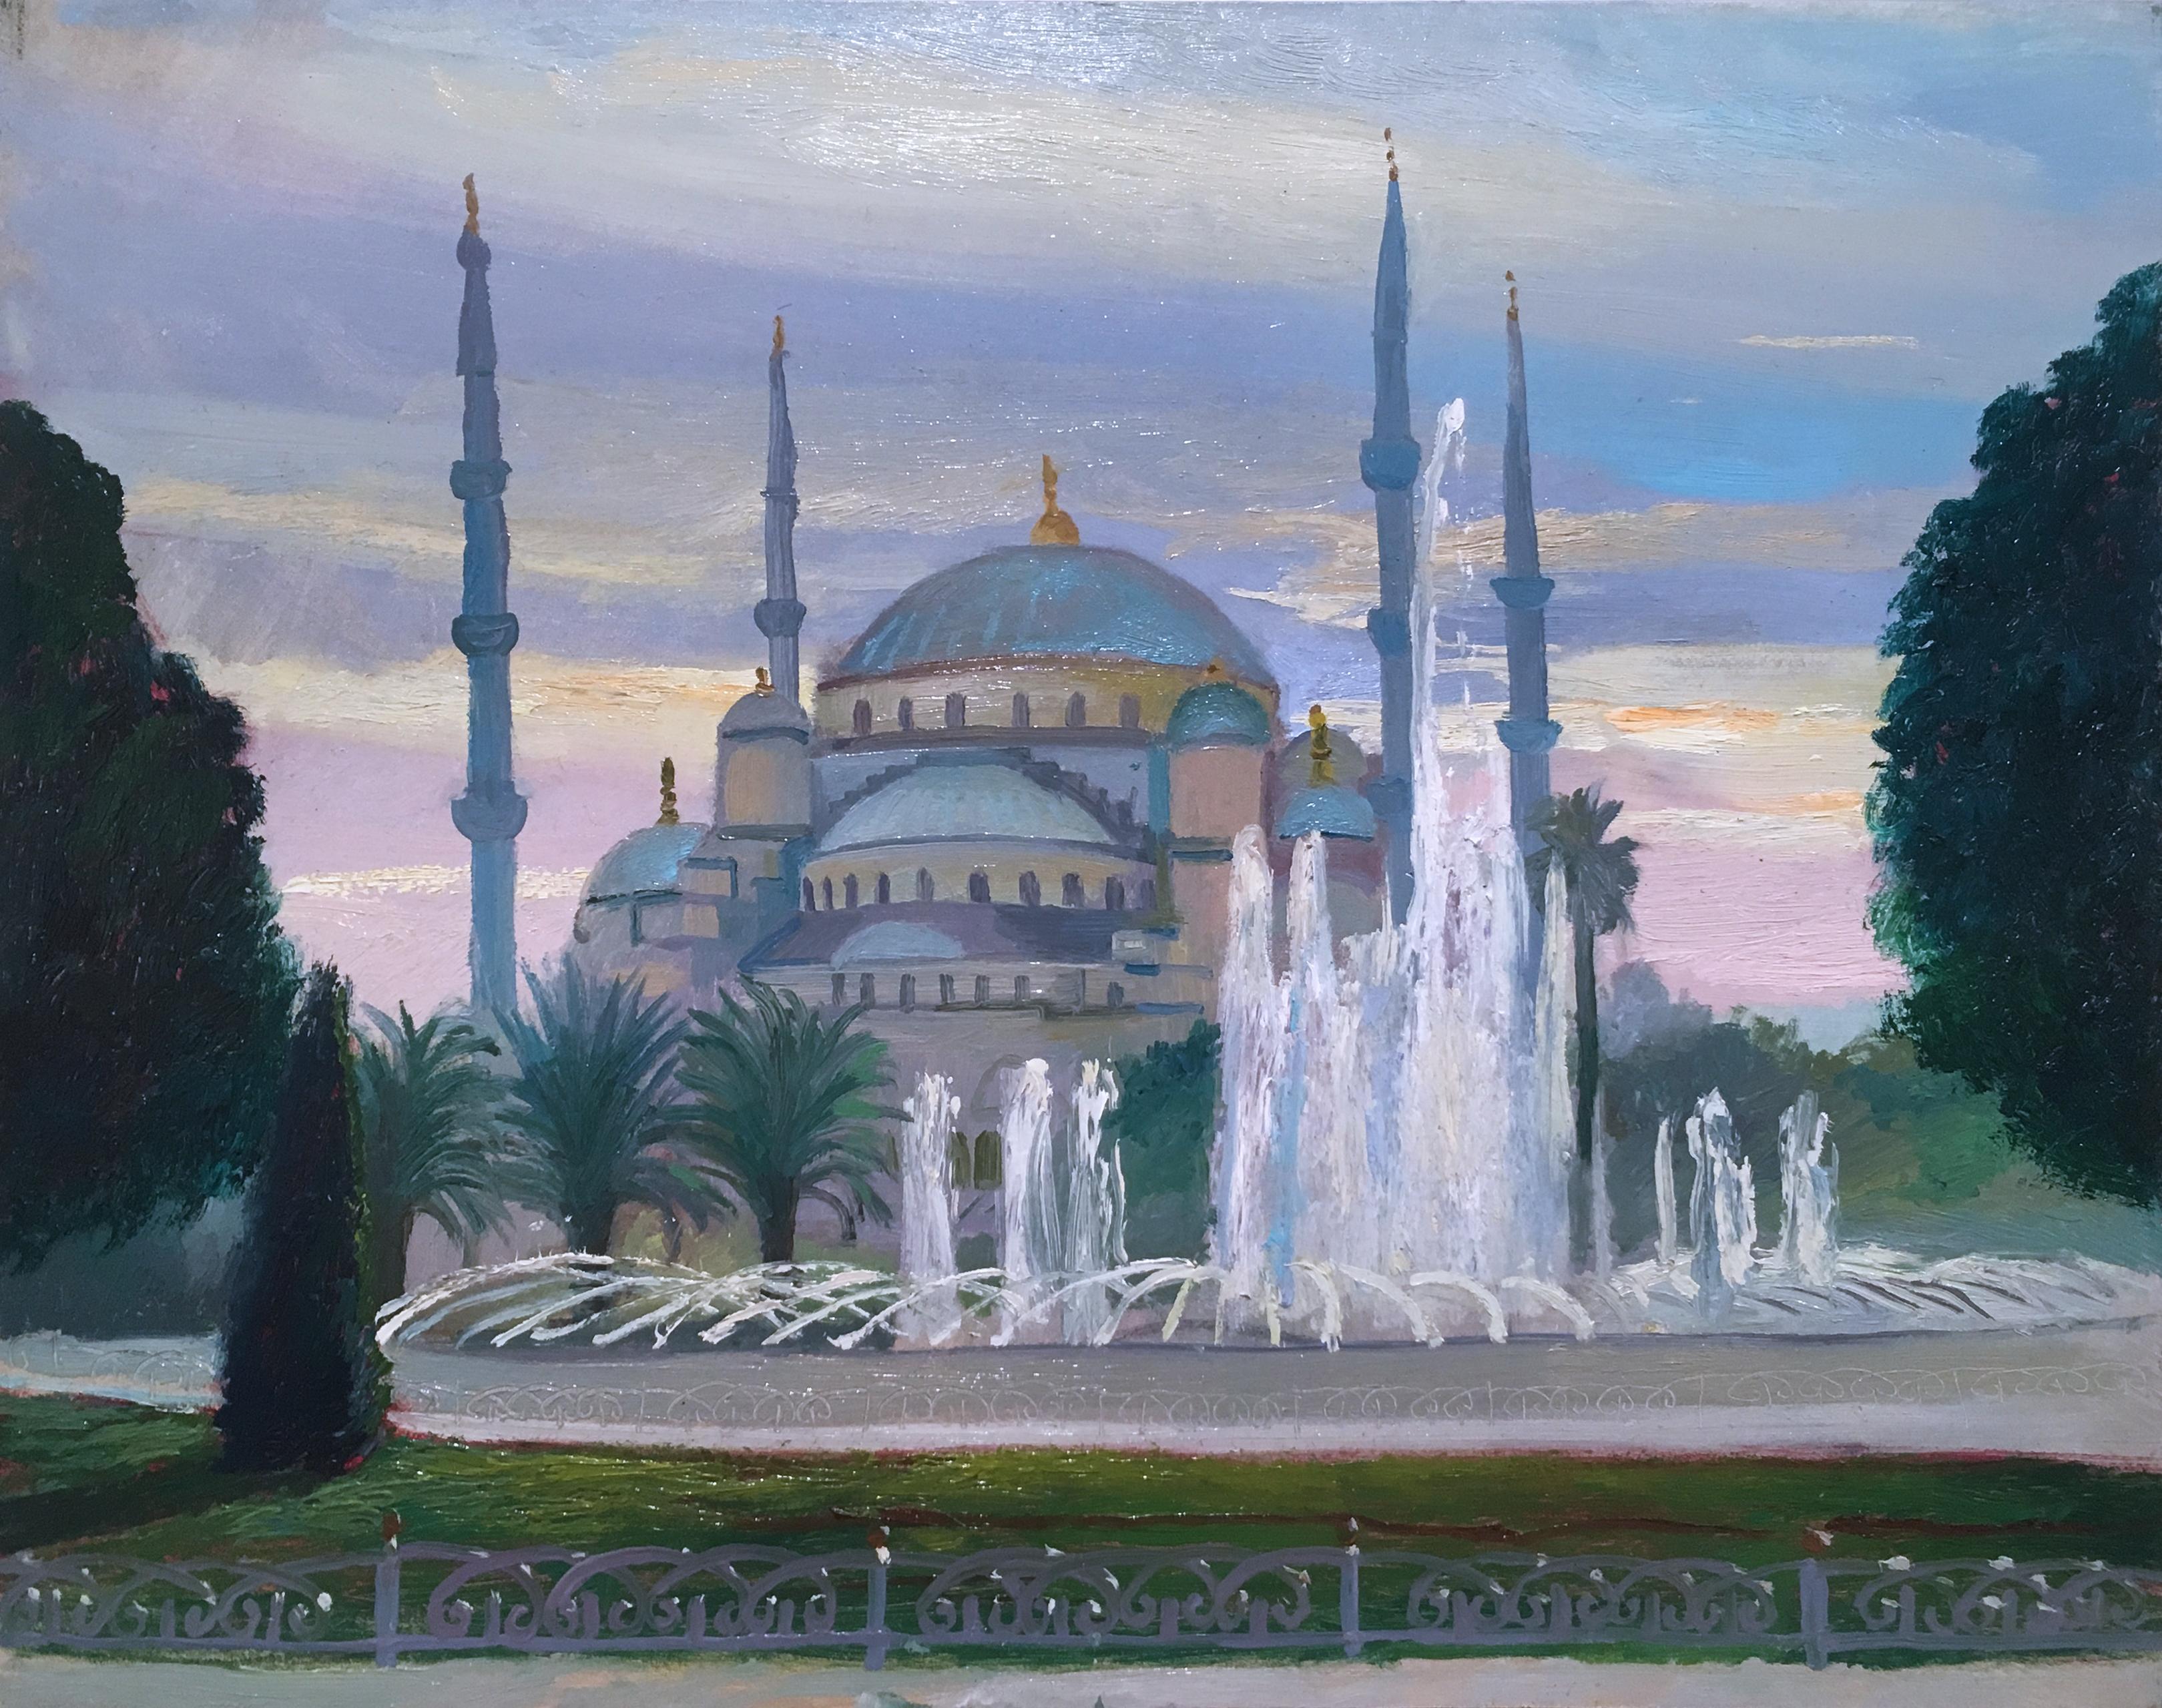 Istanbul Blue Mosque, plein air figurative, landscape, oil on panel, 2014 - Painting by Thomas John Carlson